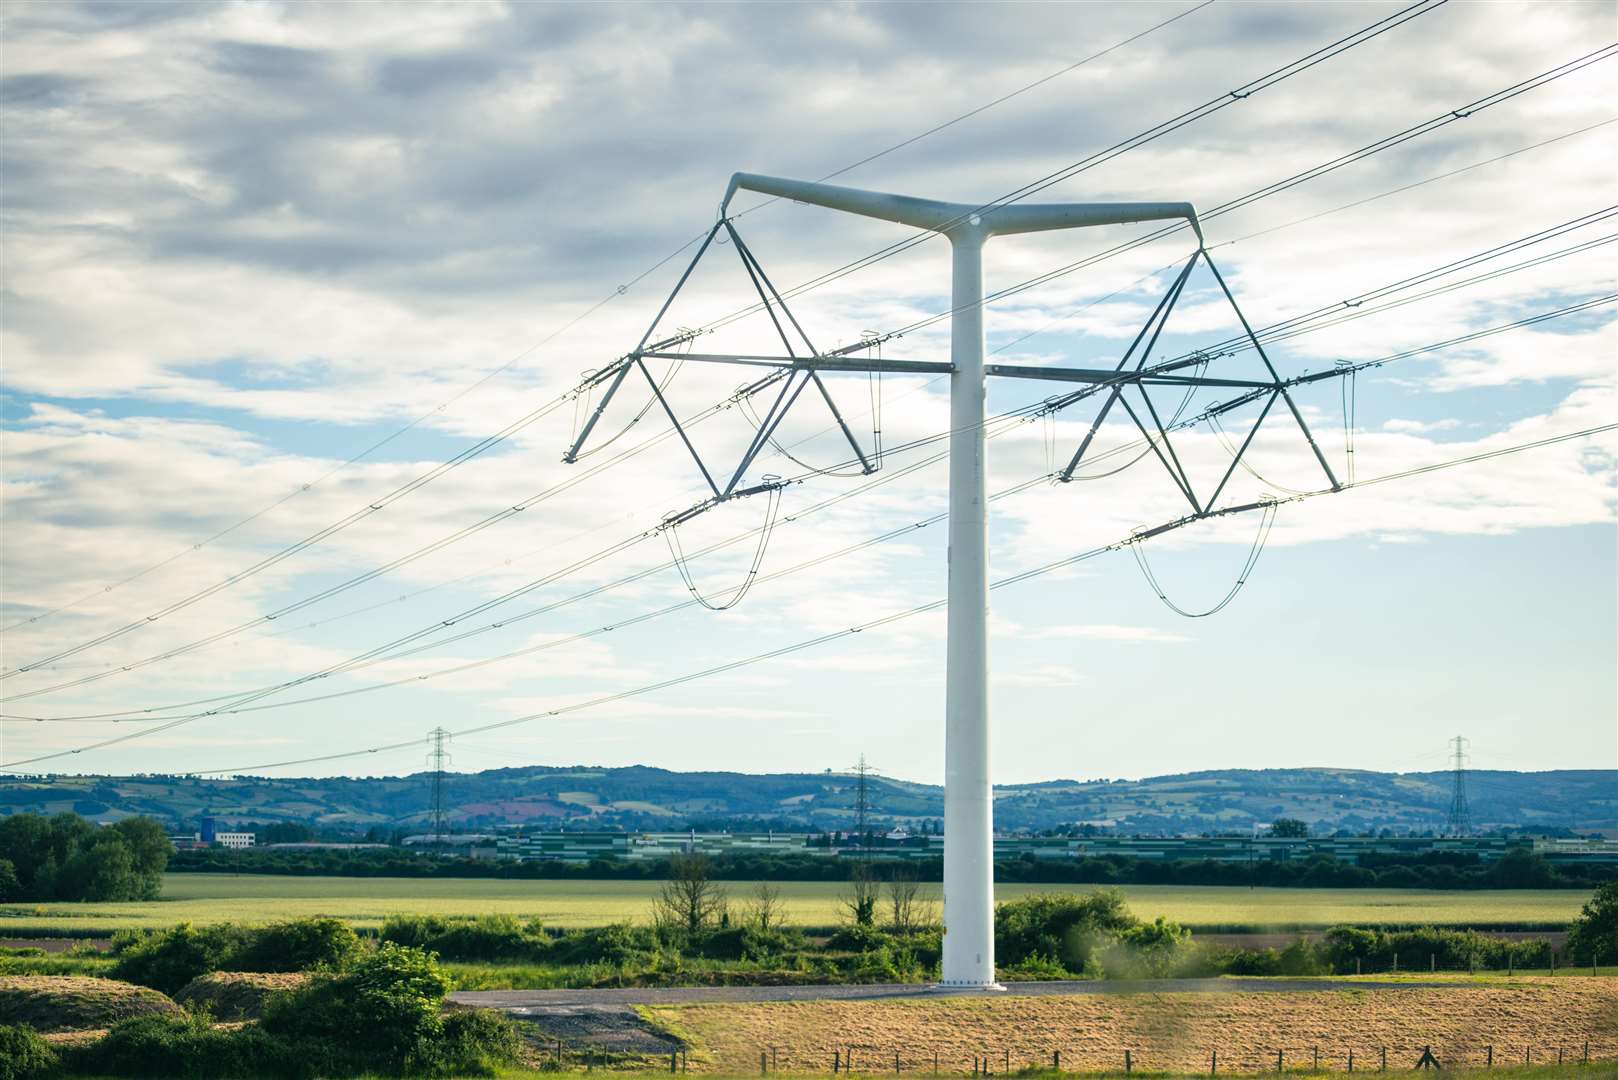 One of the new-style T-pylons that could be used as part of the plans, which have been criticised by MP Sir Bernard Jenkin